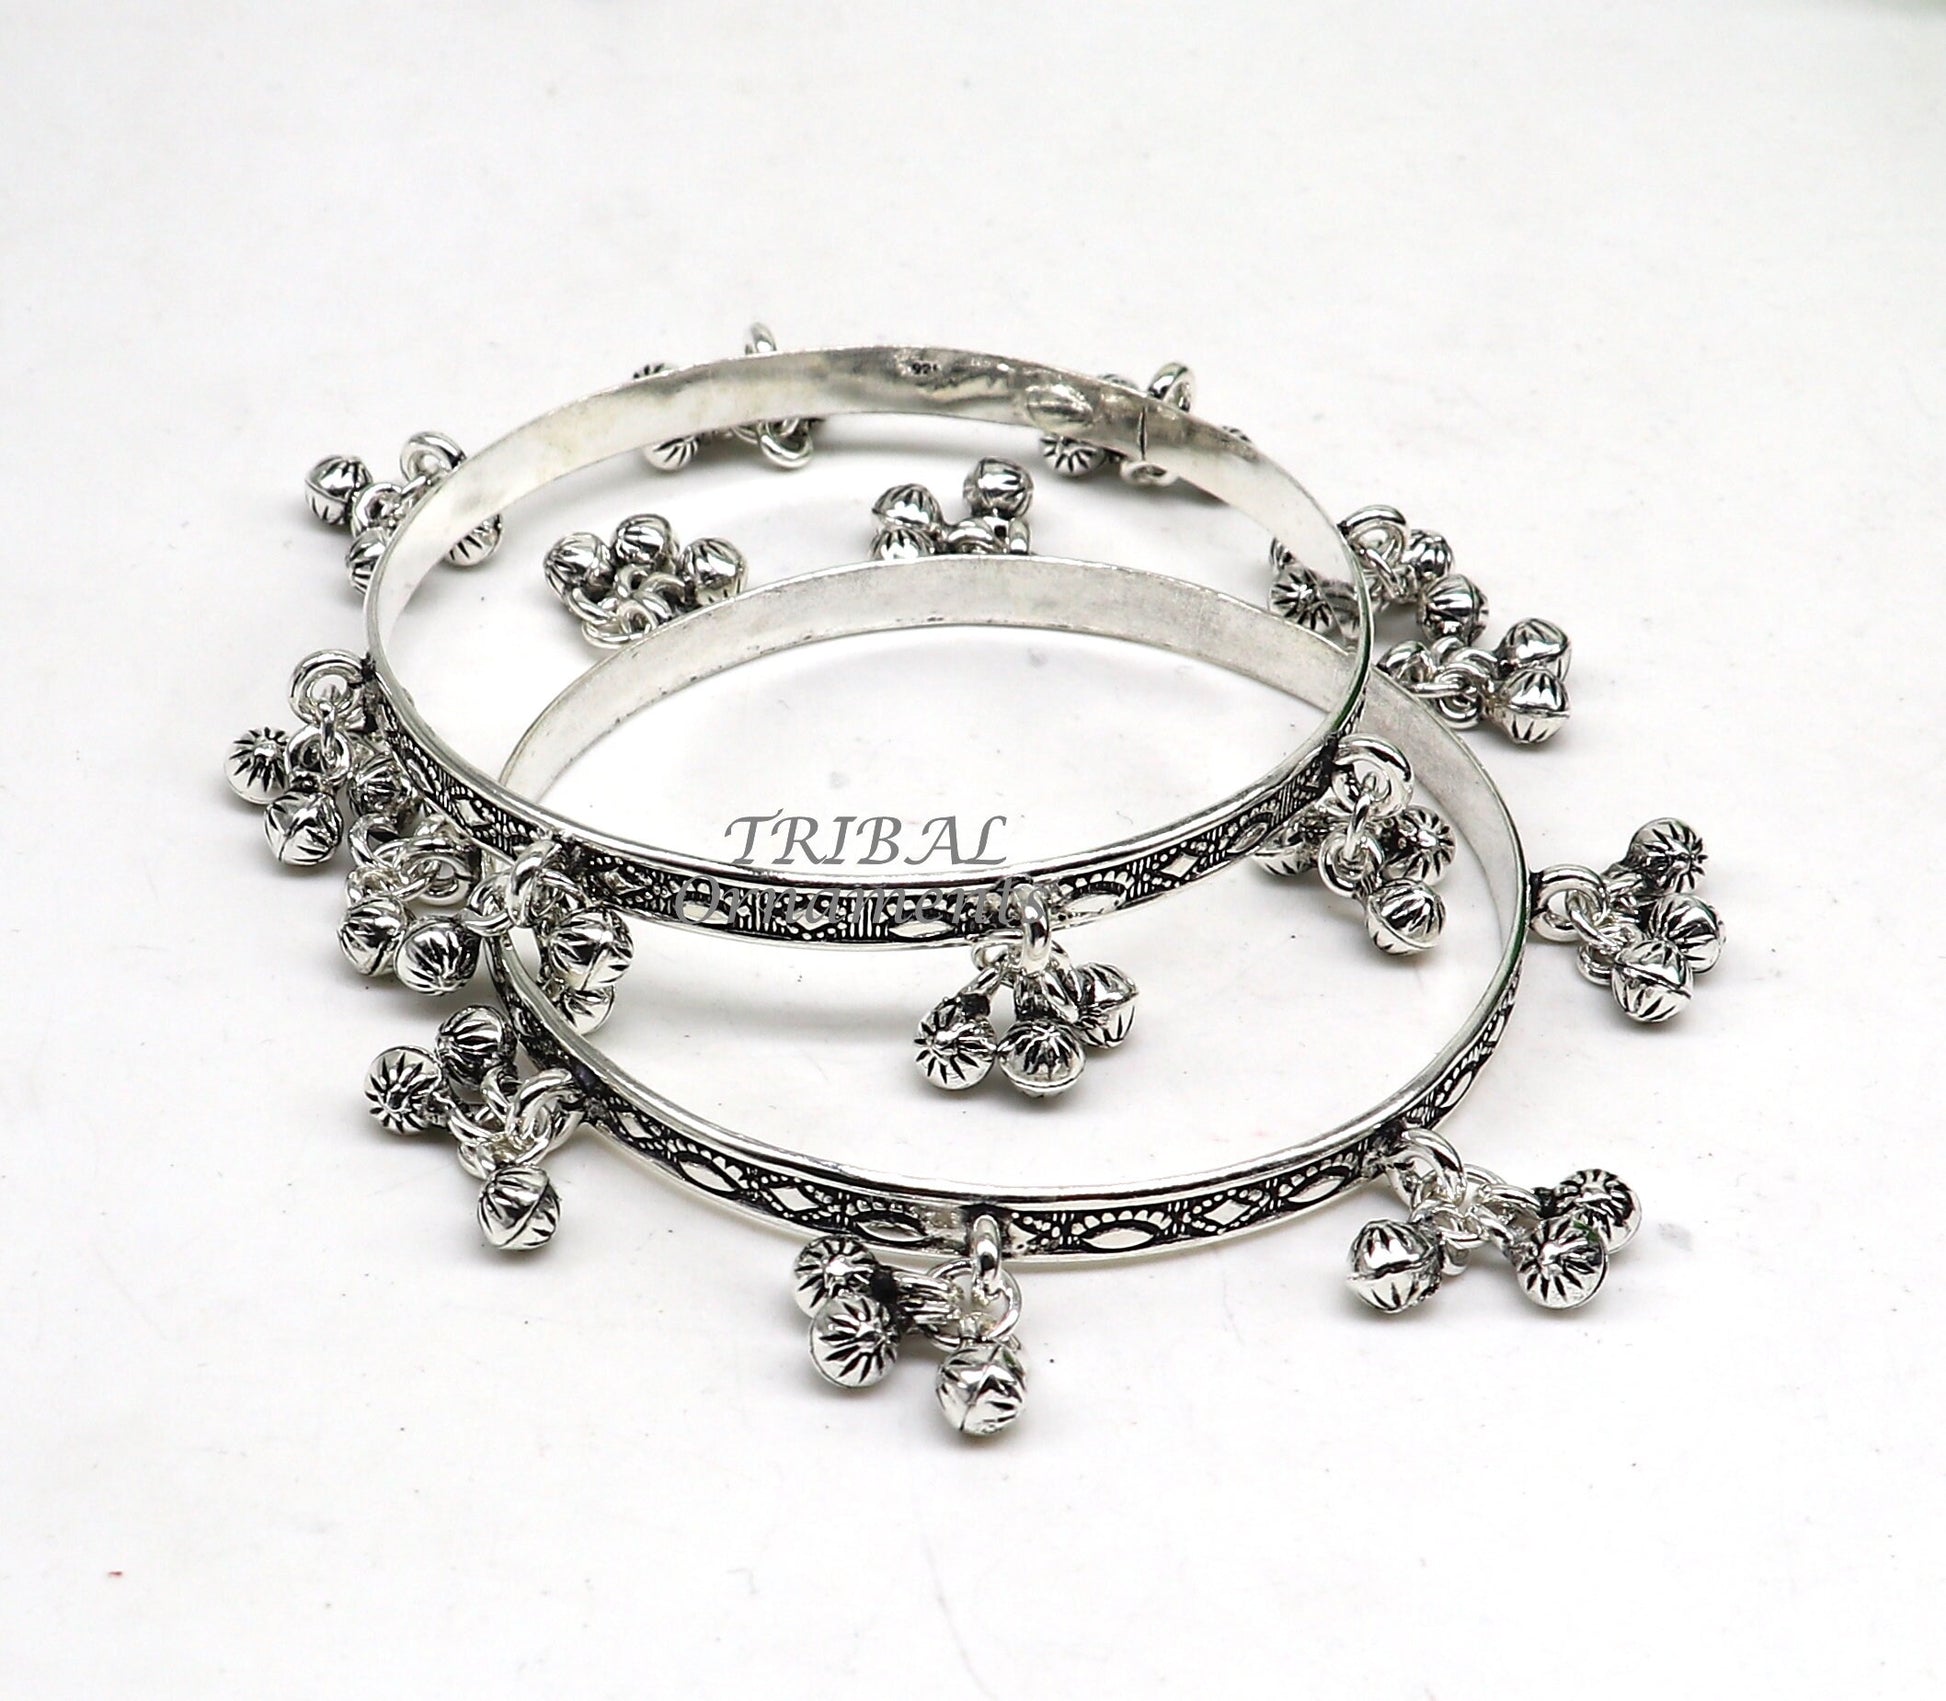 925 sterling silver handmade girl's bangle bracelet unique gorgeous jingling bells drops. excellent charm brides gifting jewelry ba178 - TRIBAL ORNAMENTS